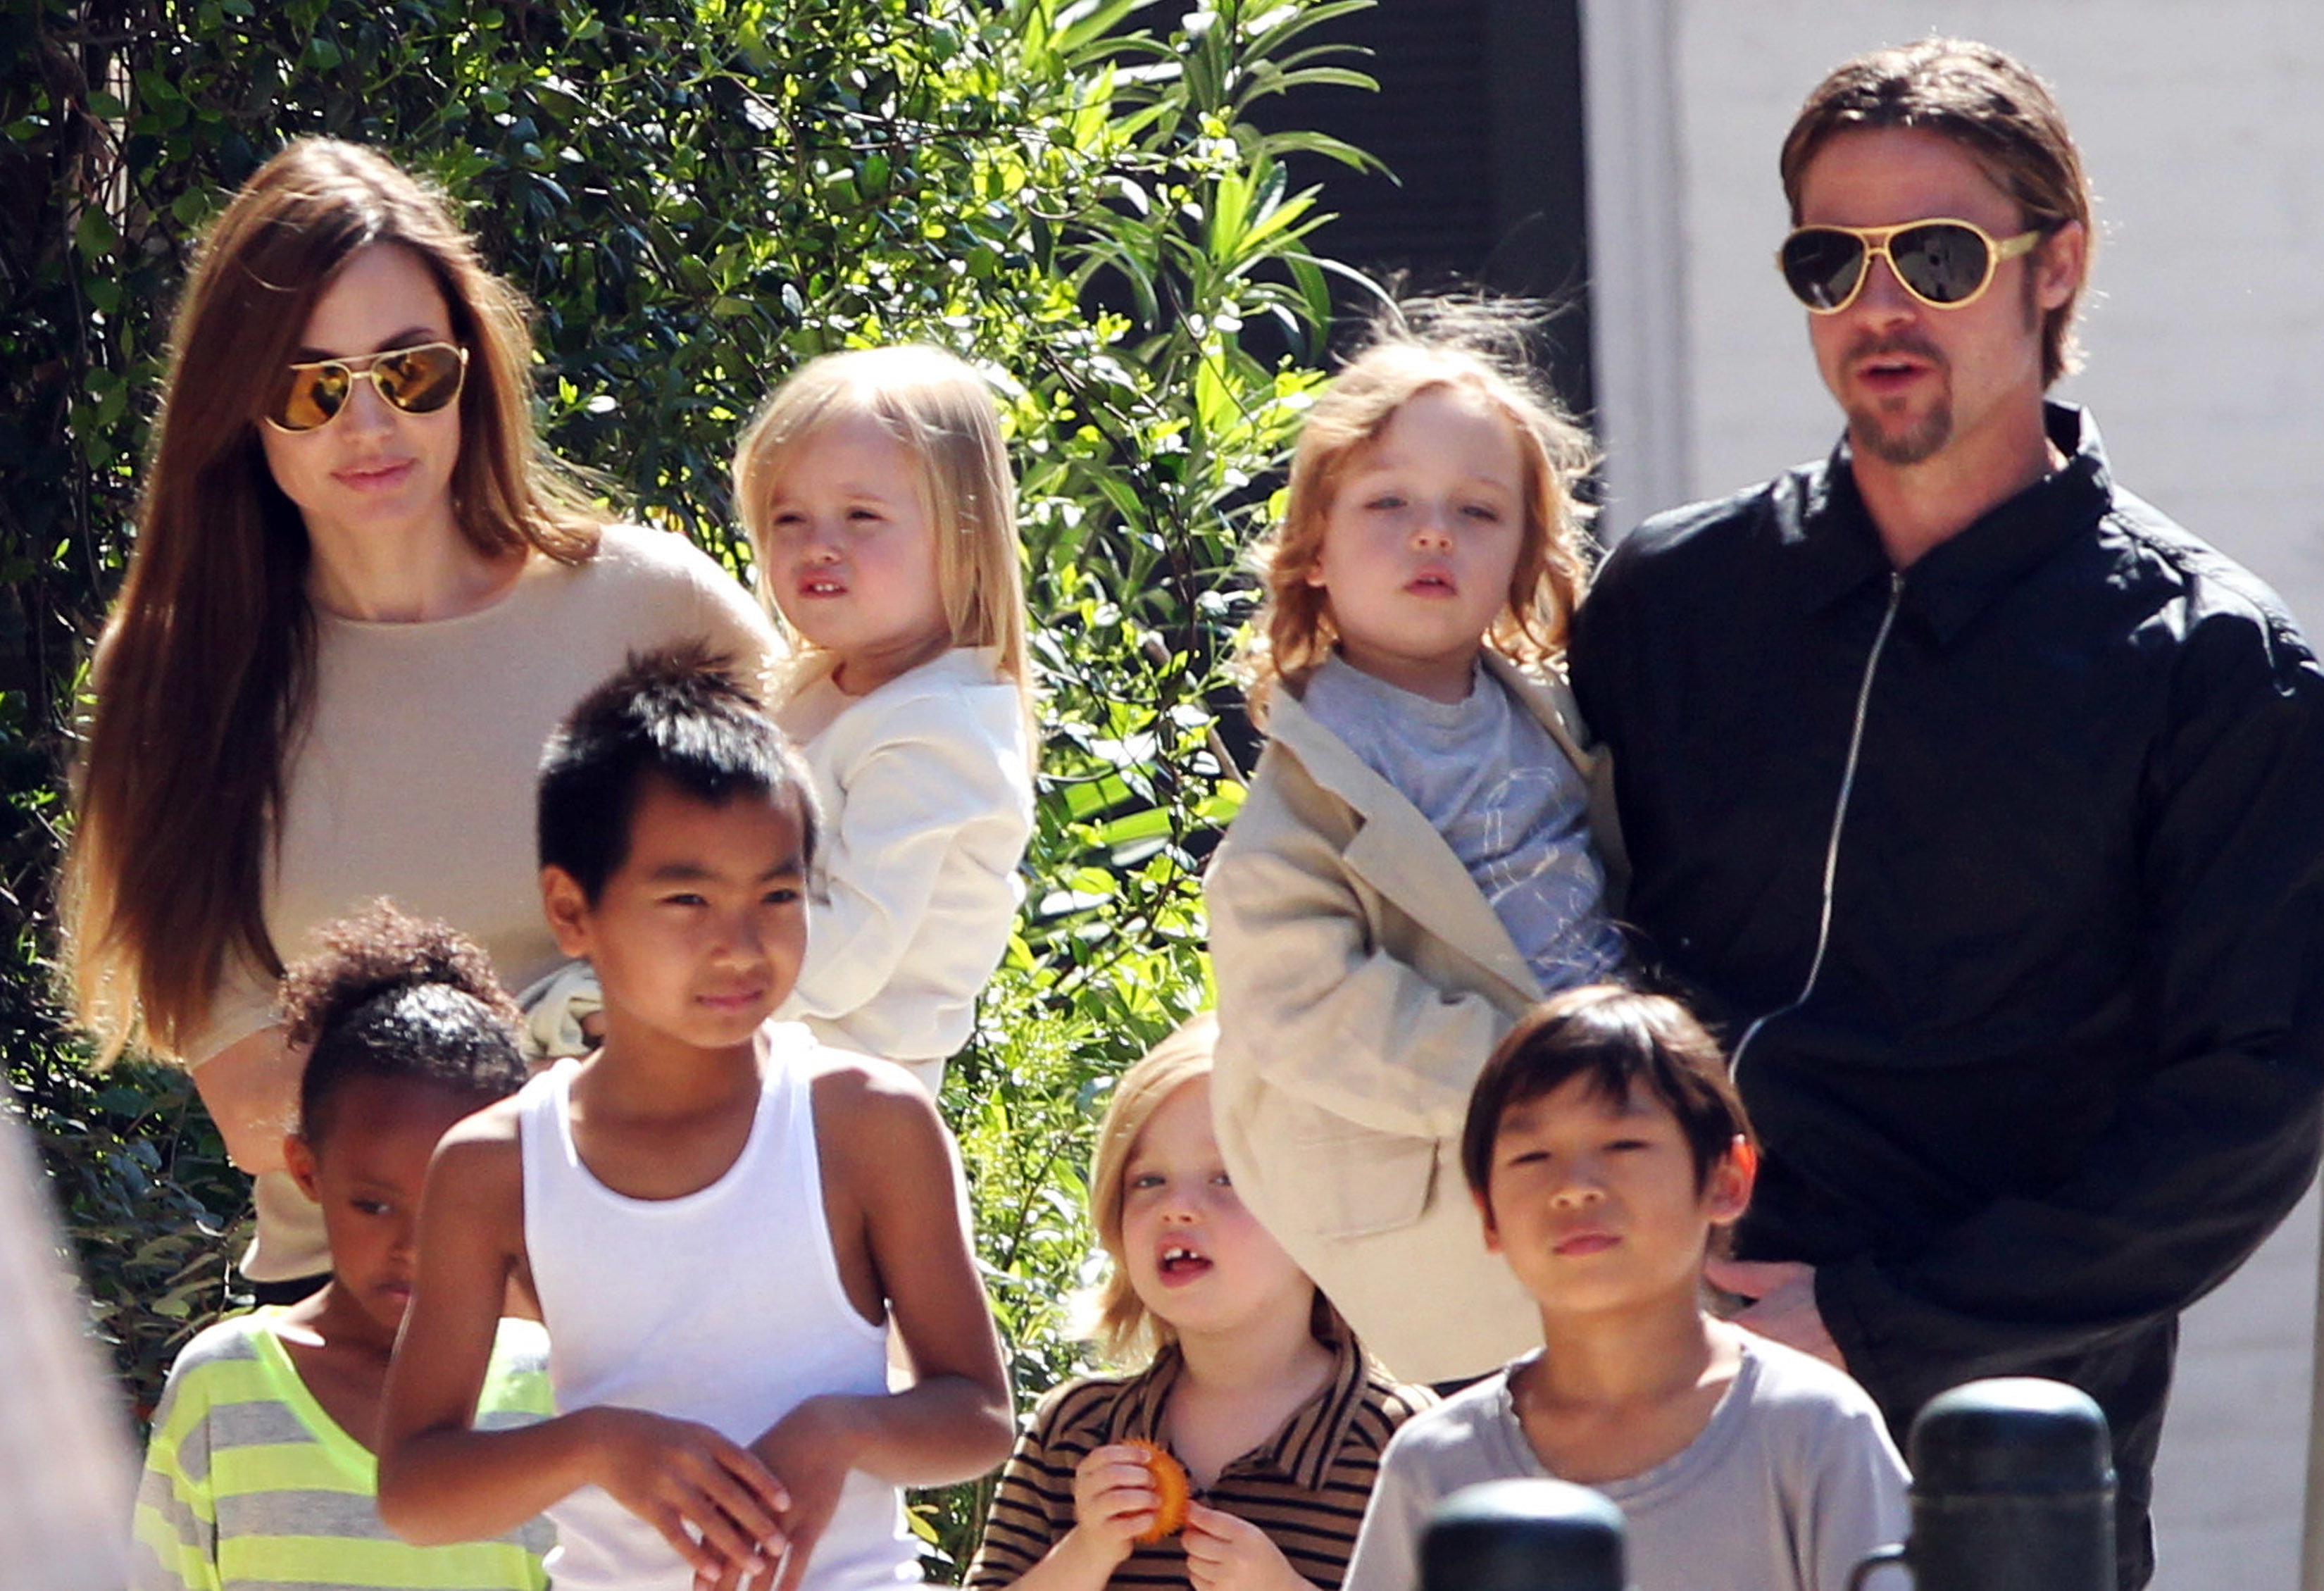 have-brad-pitt-and-angelina-jolie-just-secretly-adopted-their-7th-child-788633